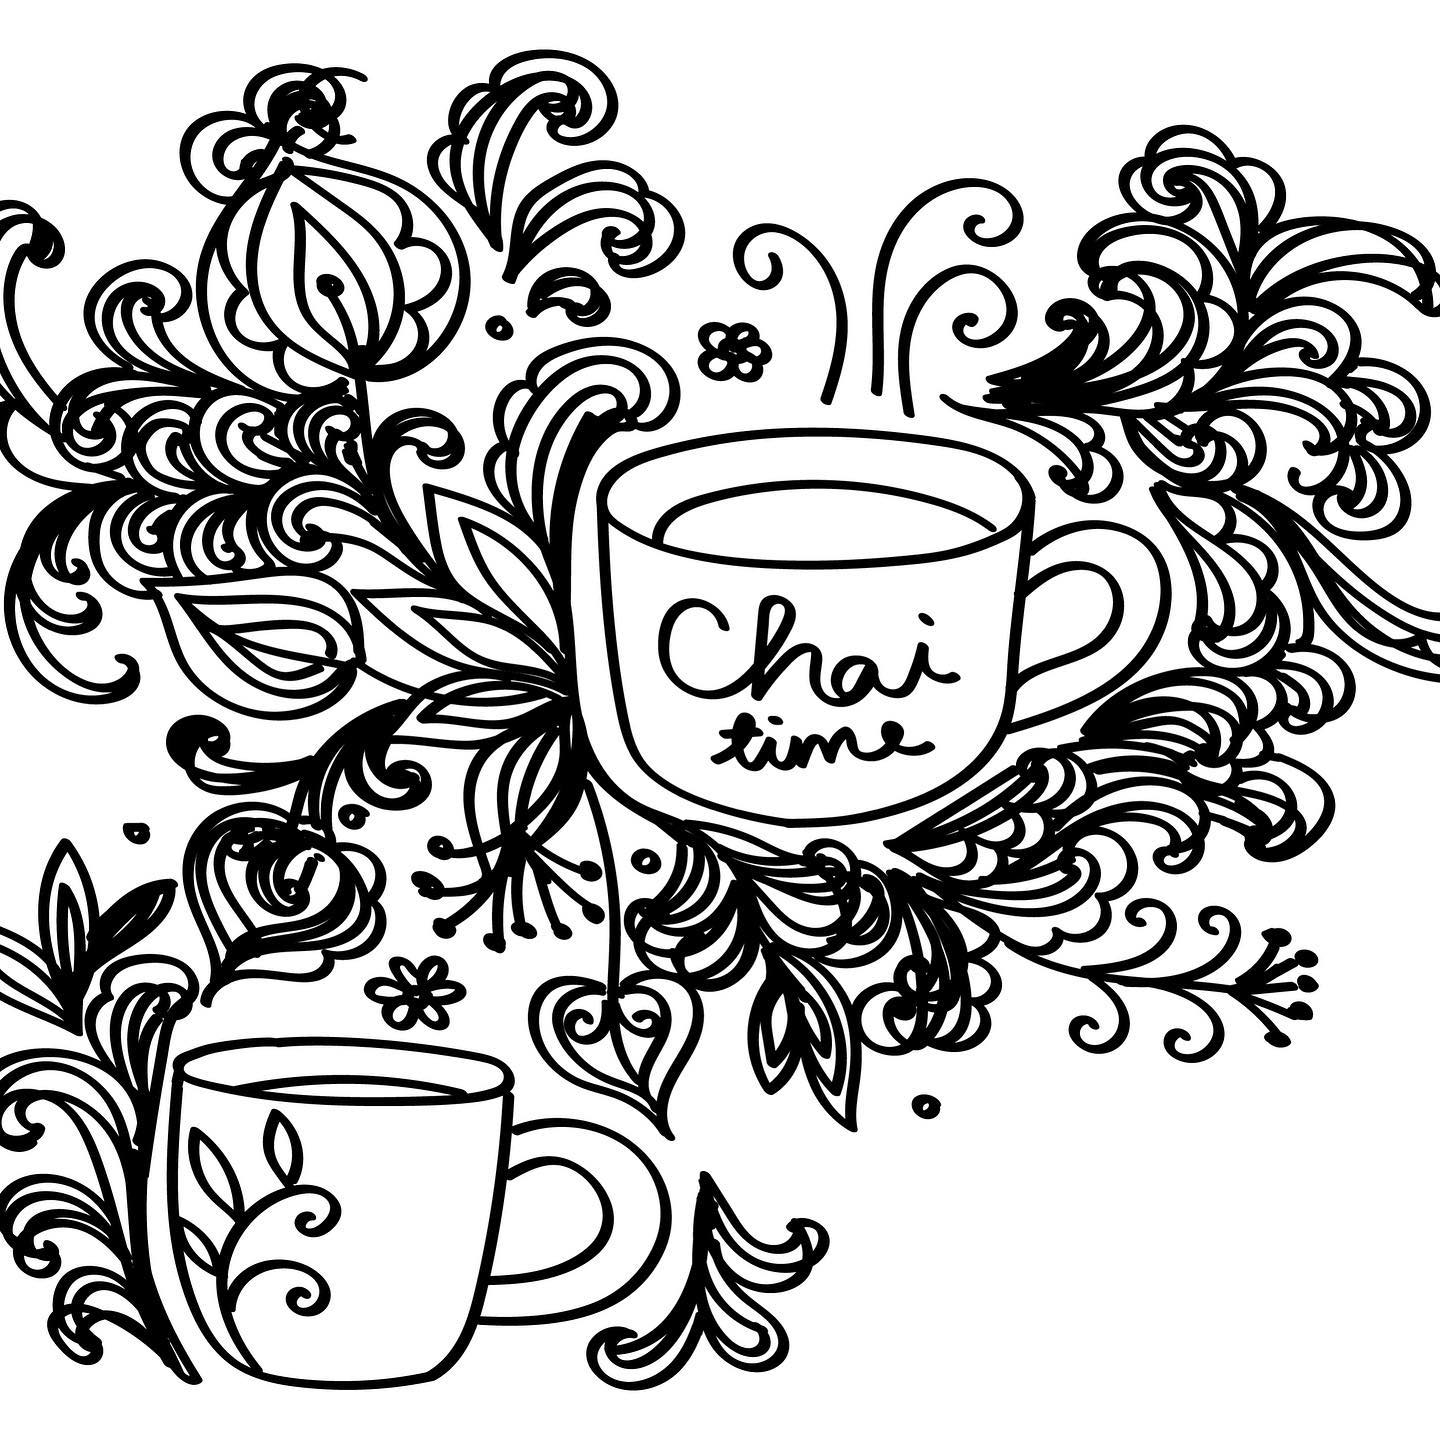 Remember to fill your cup with joy! Chai time is a good time to reset. To replenish. To fill your cup.